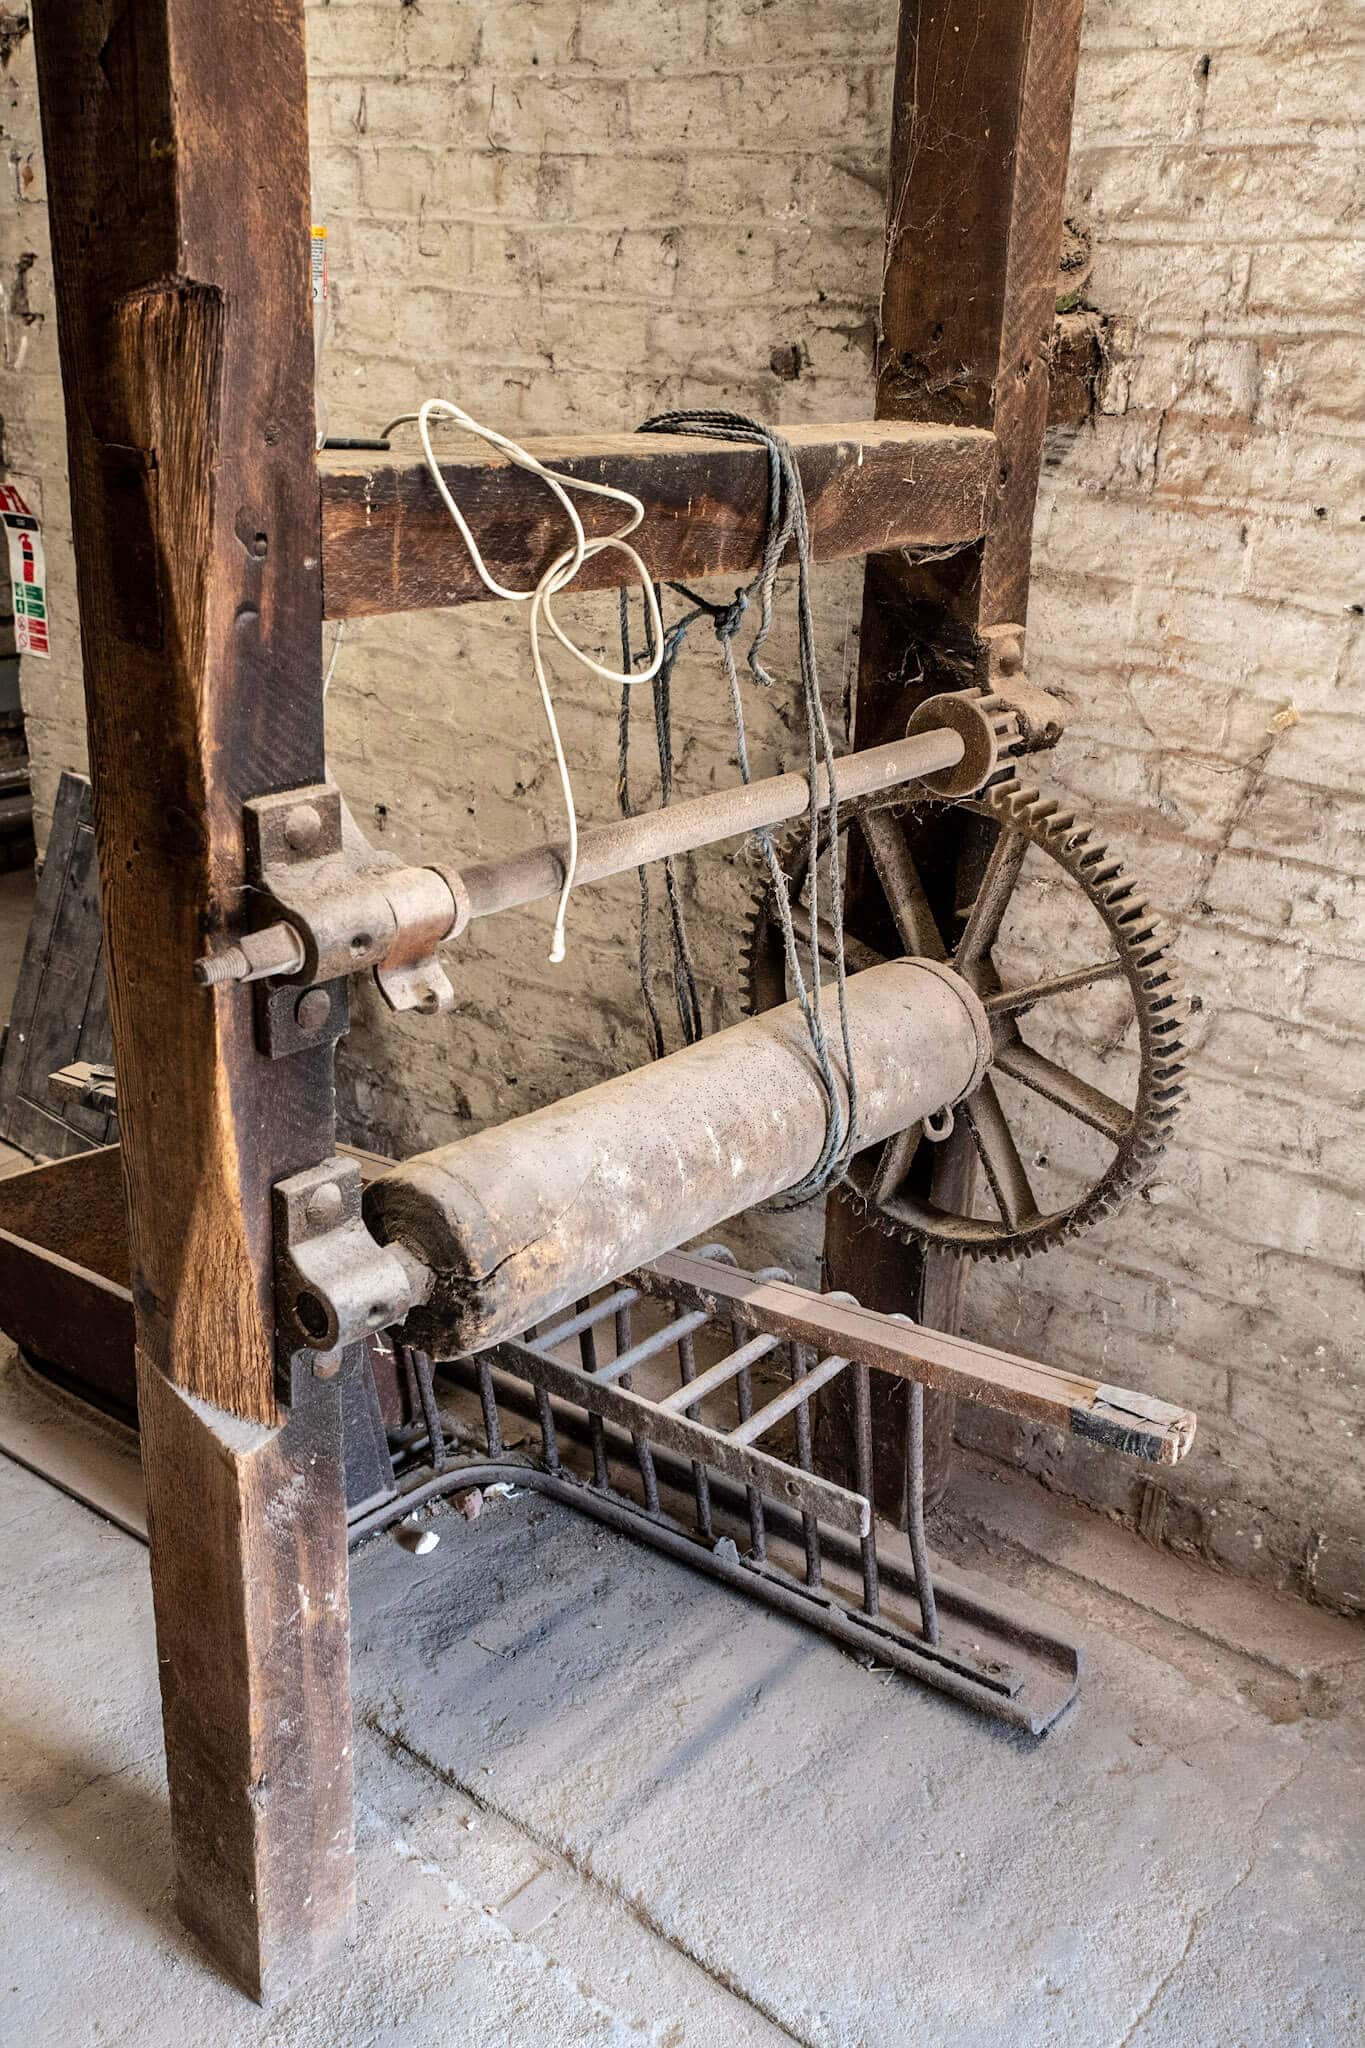 Part of the glasshouse restoration gallery - a picture taken by Andy Gilbert of and old cotton spinning machine